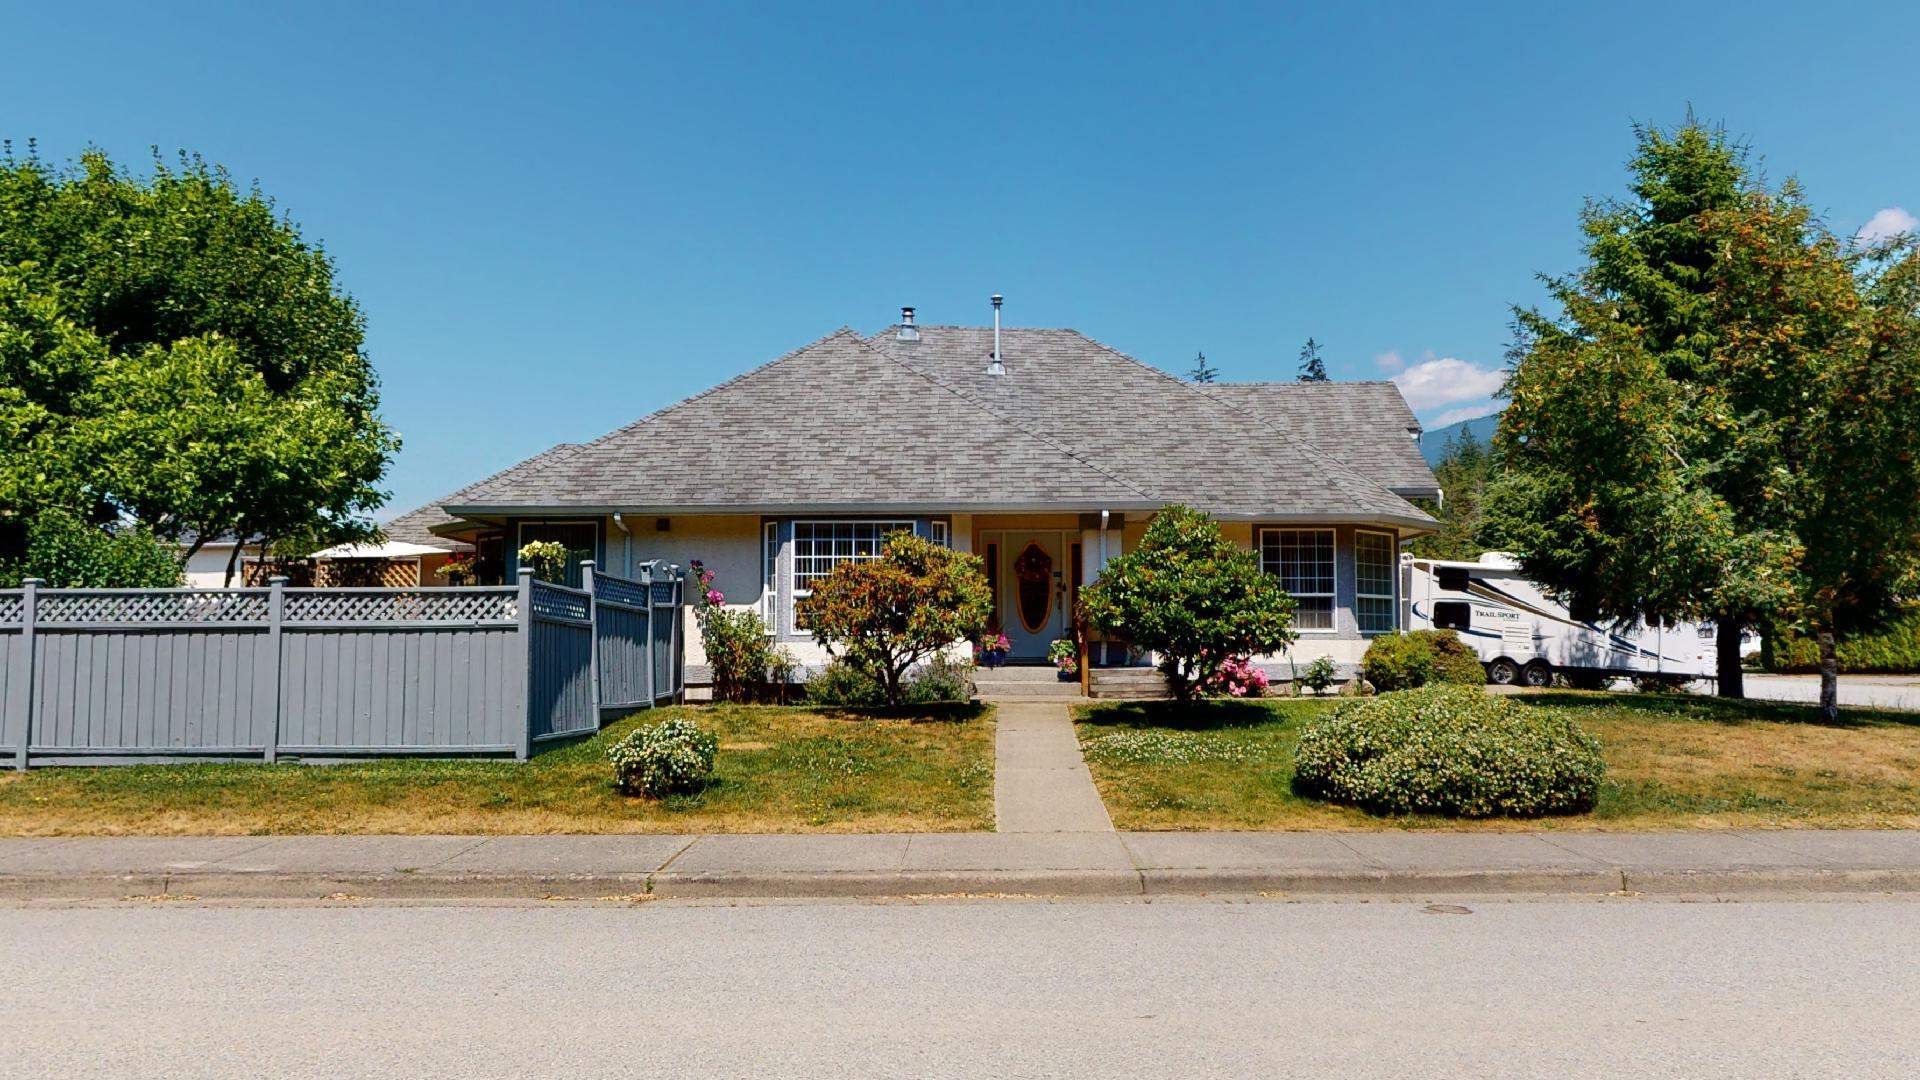 Main Photo: 1024 REGENCY PLACE in Squamish: Tantalus House for sale : MLS®# R2598823